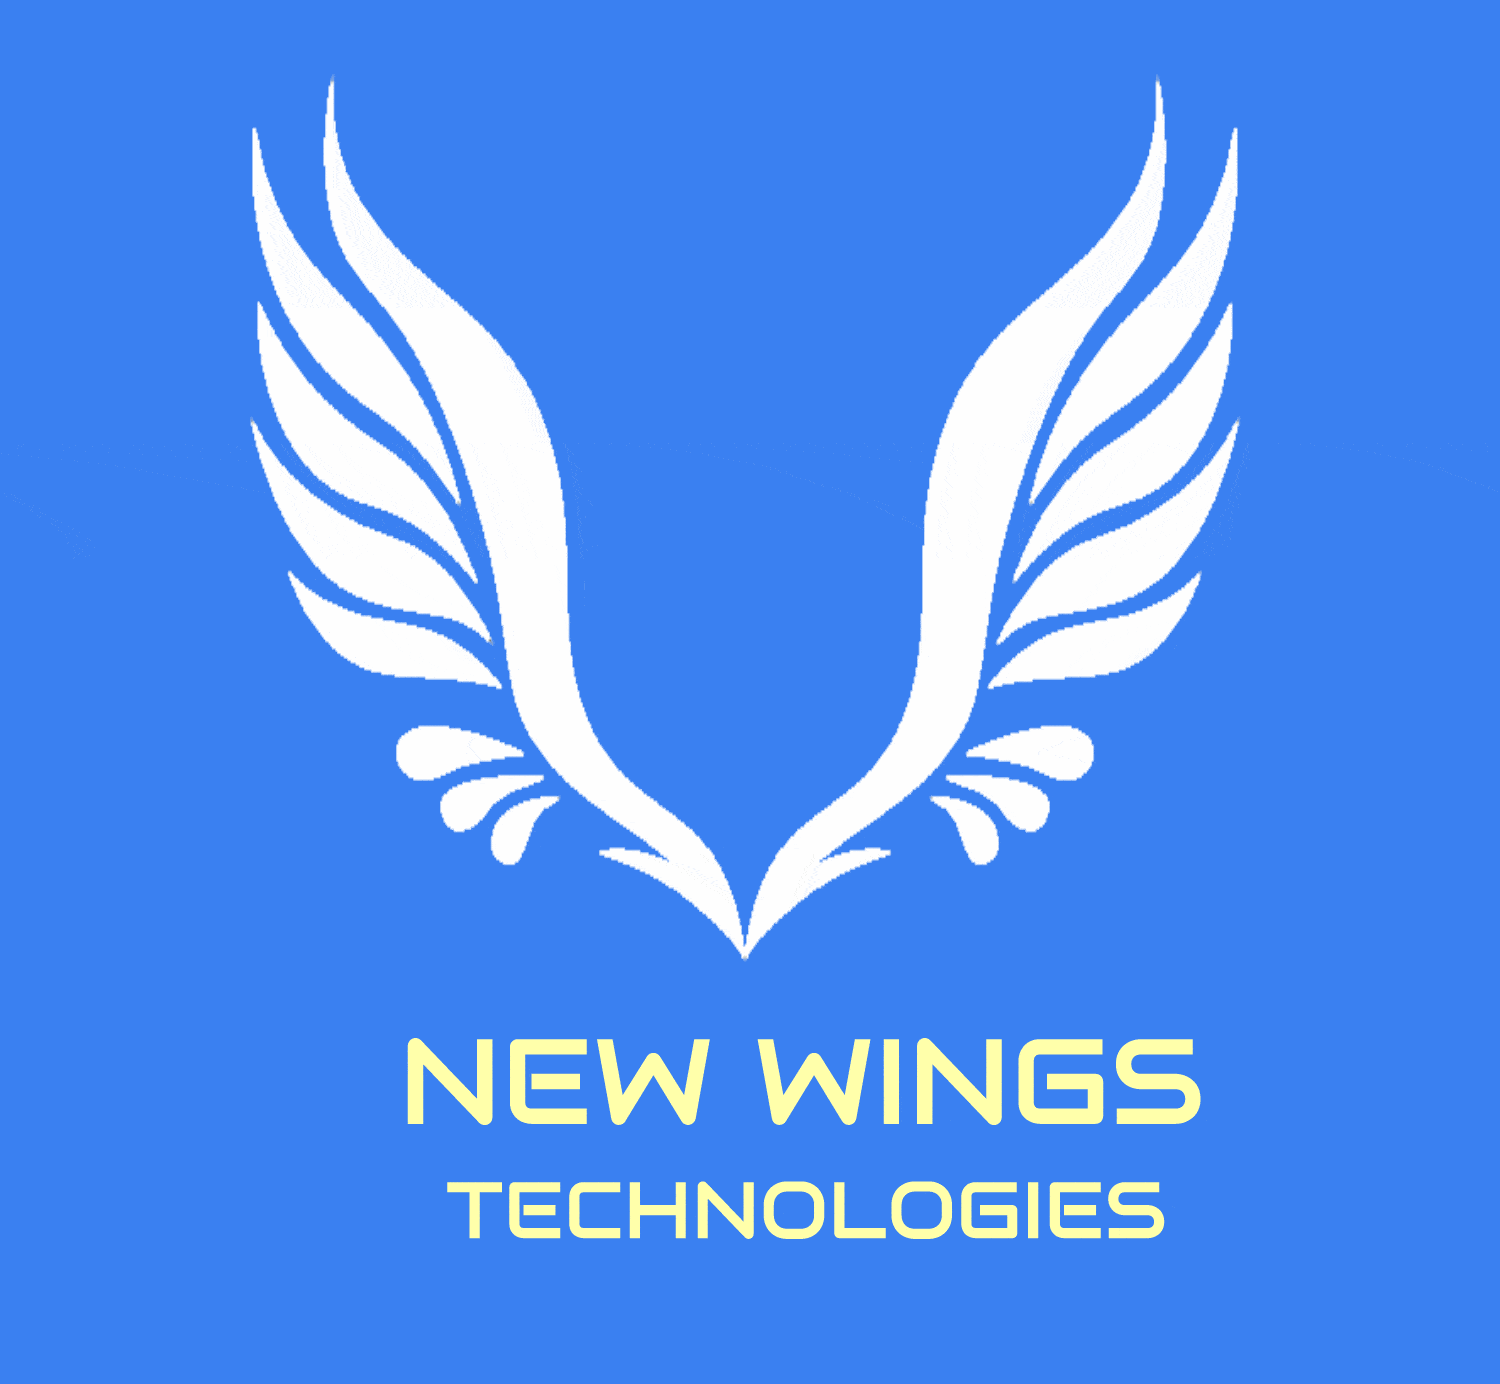 Globe with Wings Logo - skilled security researchers across the globe